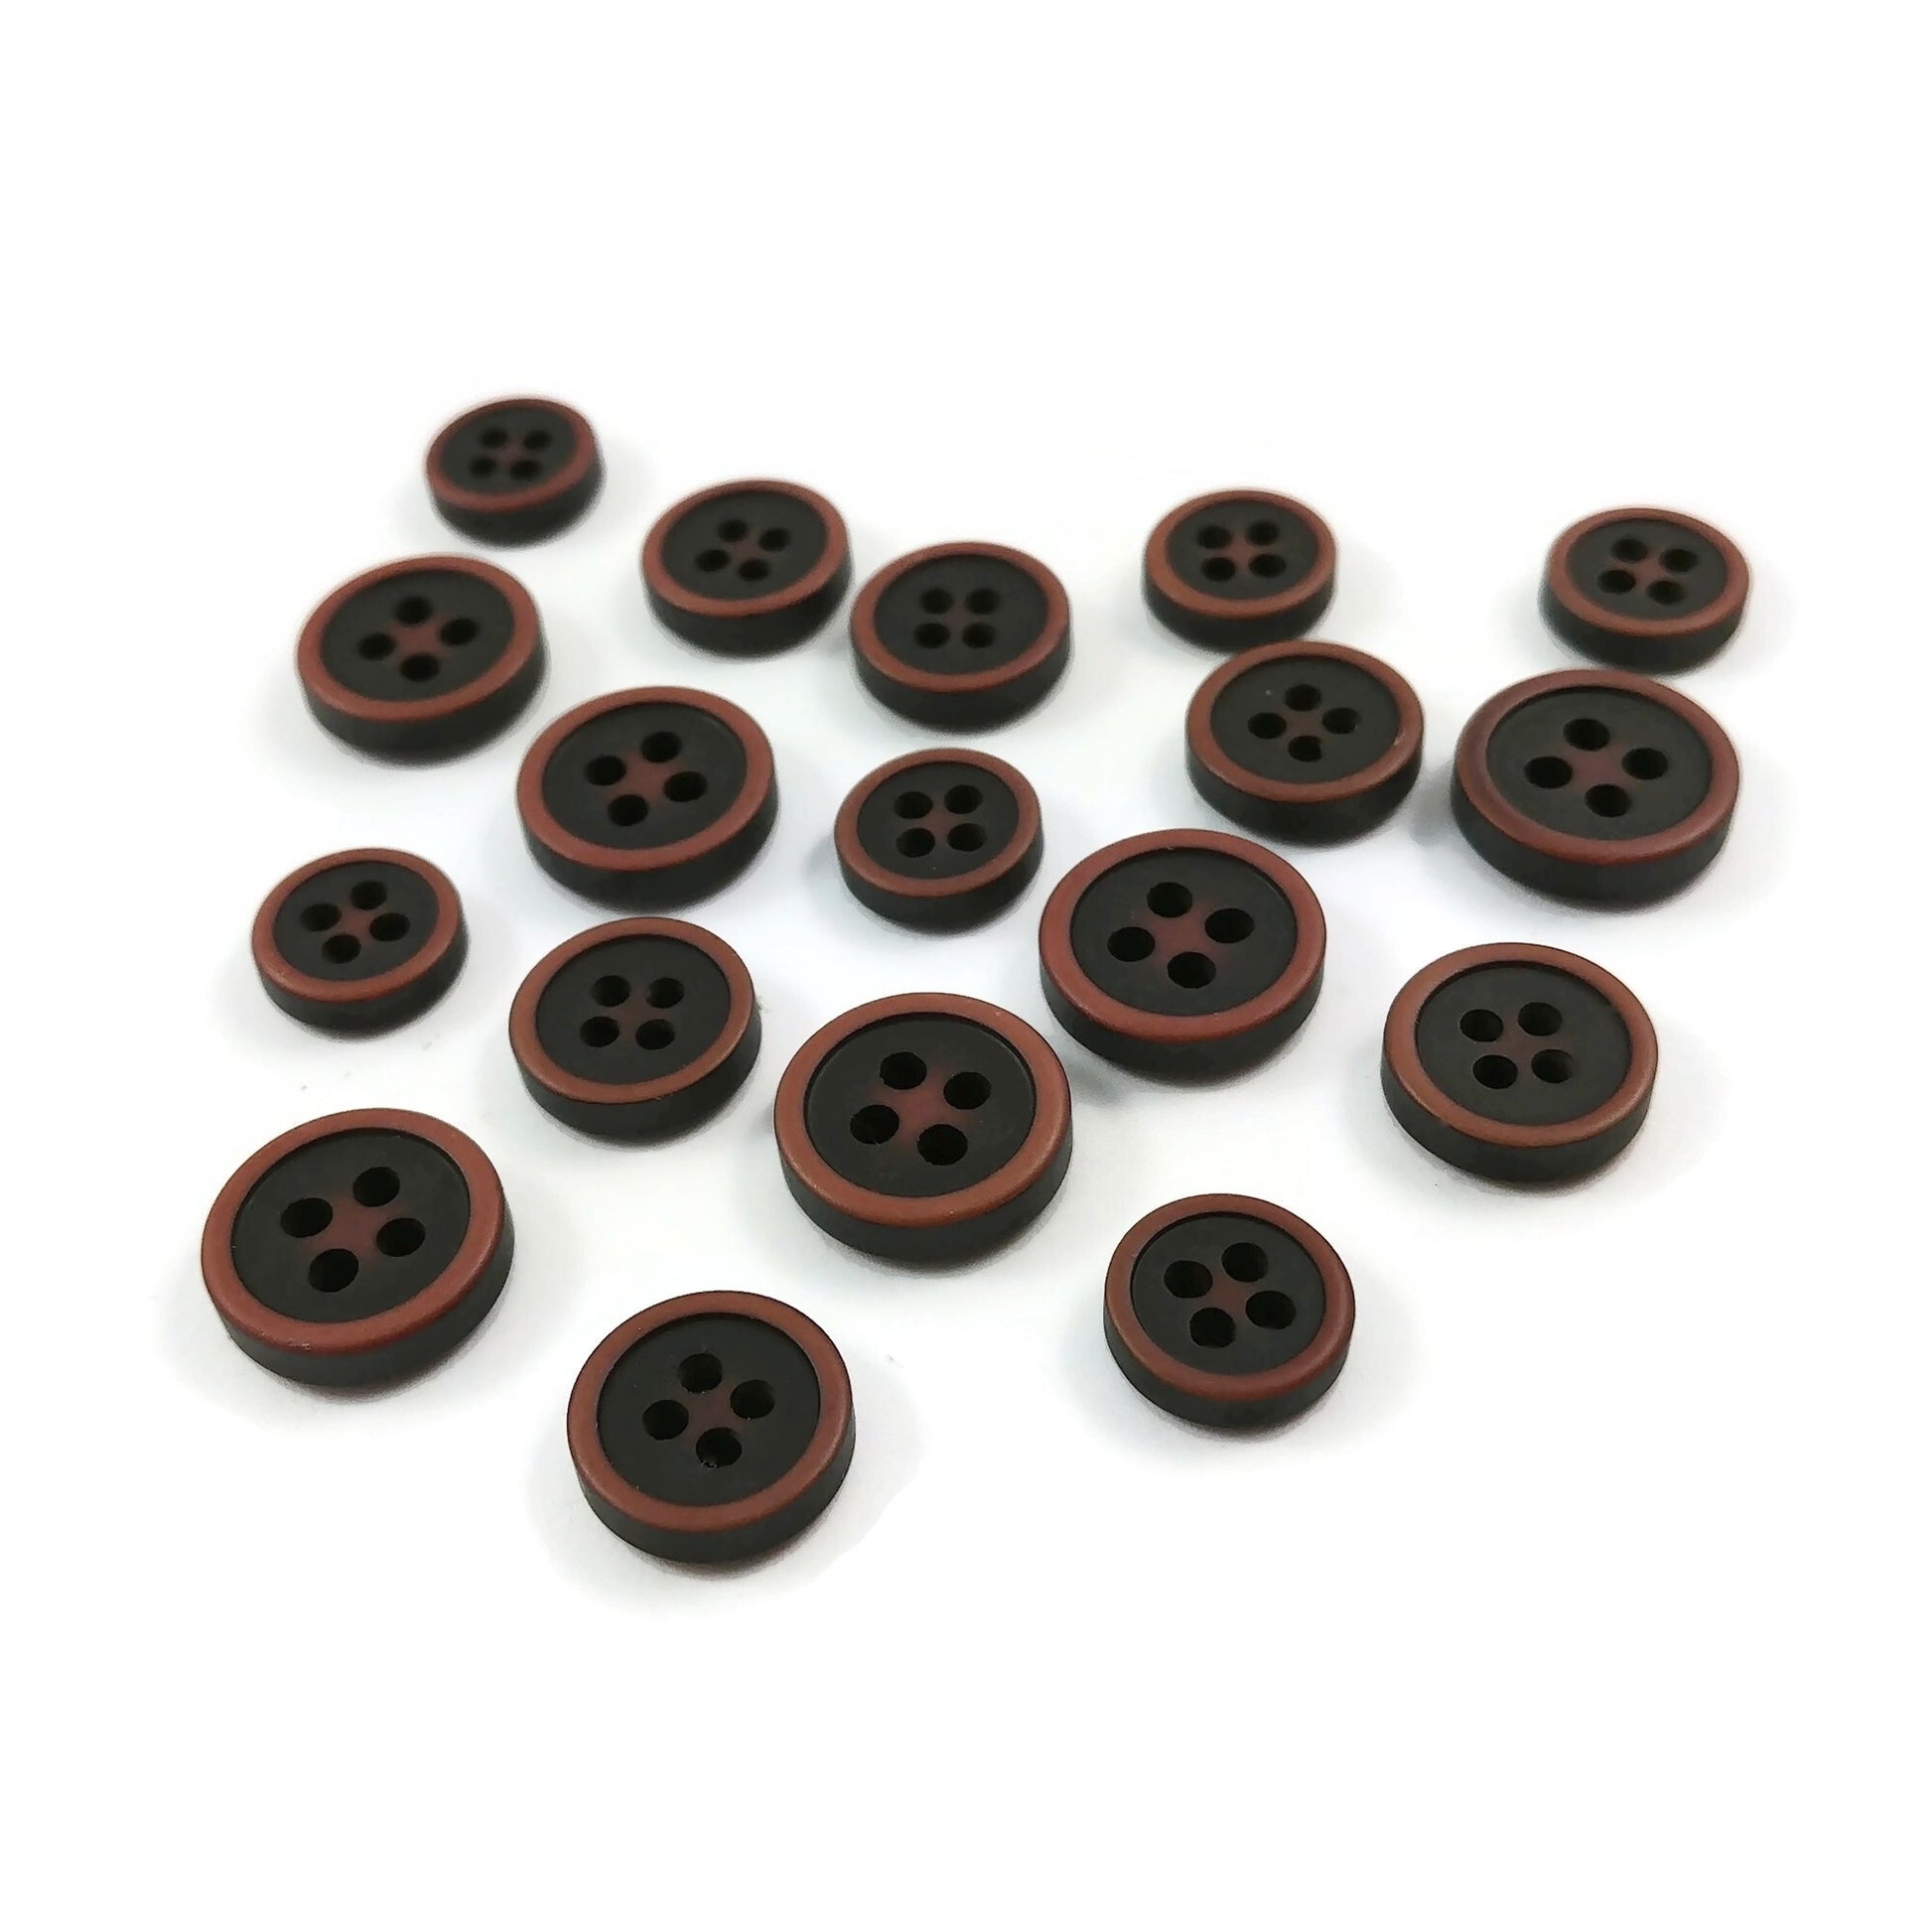 10 dark brown resin sewing buttons - Pick your size: 9mm, 10mm or 11mm